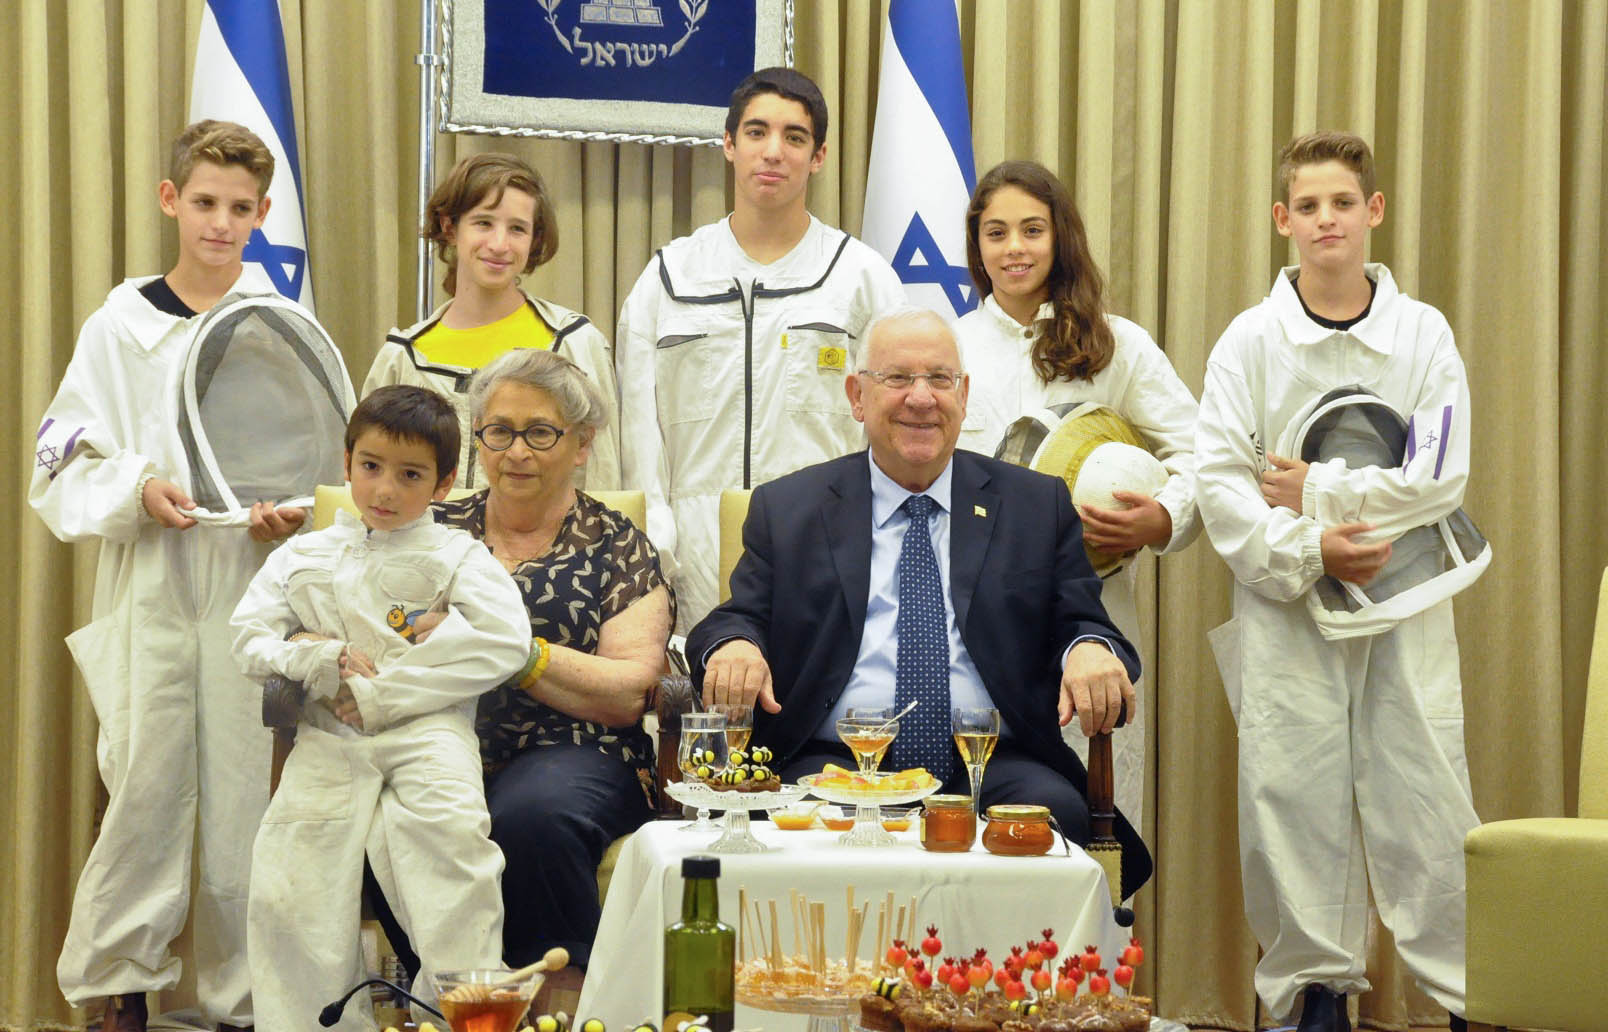 Israeli president Reuven Rivlin and his wife, Nechama, pose for a Jewish New Year photo with children of the Israeli bee and honey council. Photo by Tomer Reichman/GPO